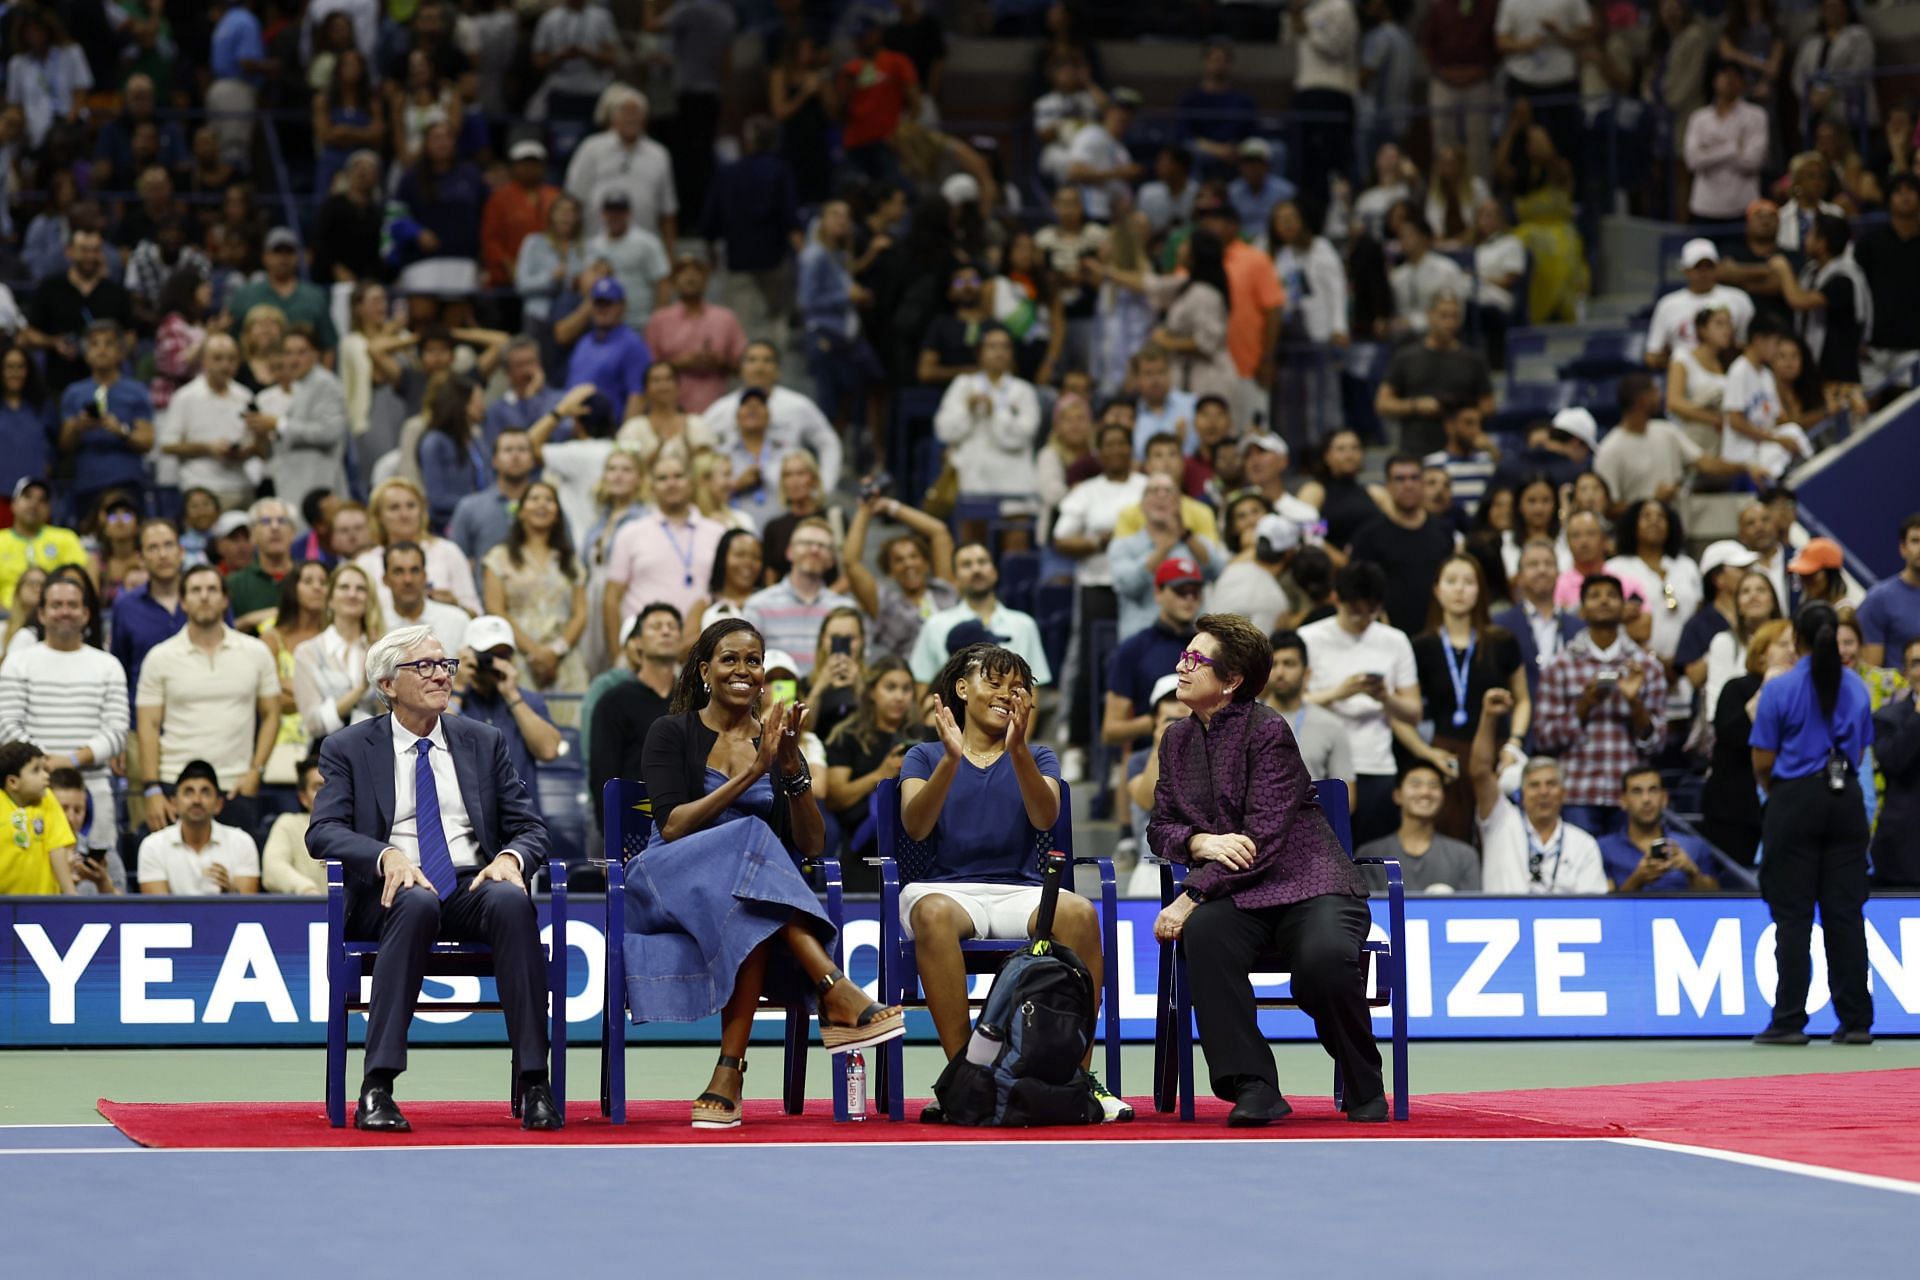 Billie Jean King with Michelle Obama at the 2023 US Open